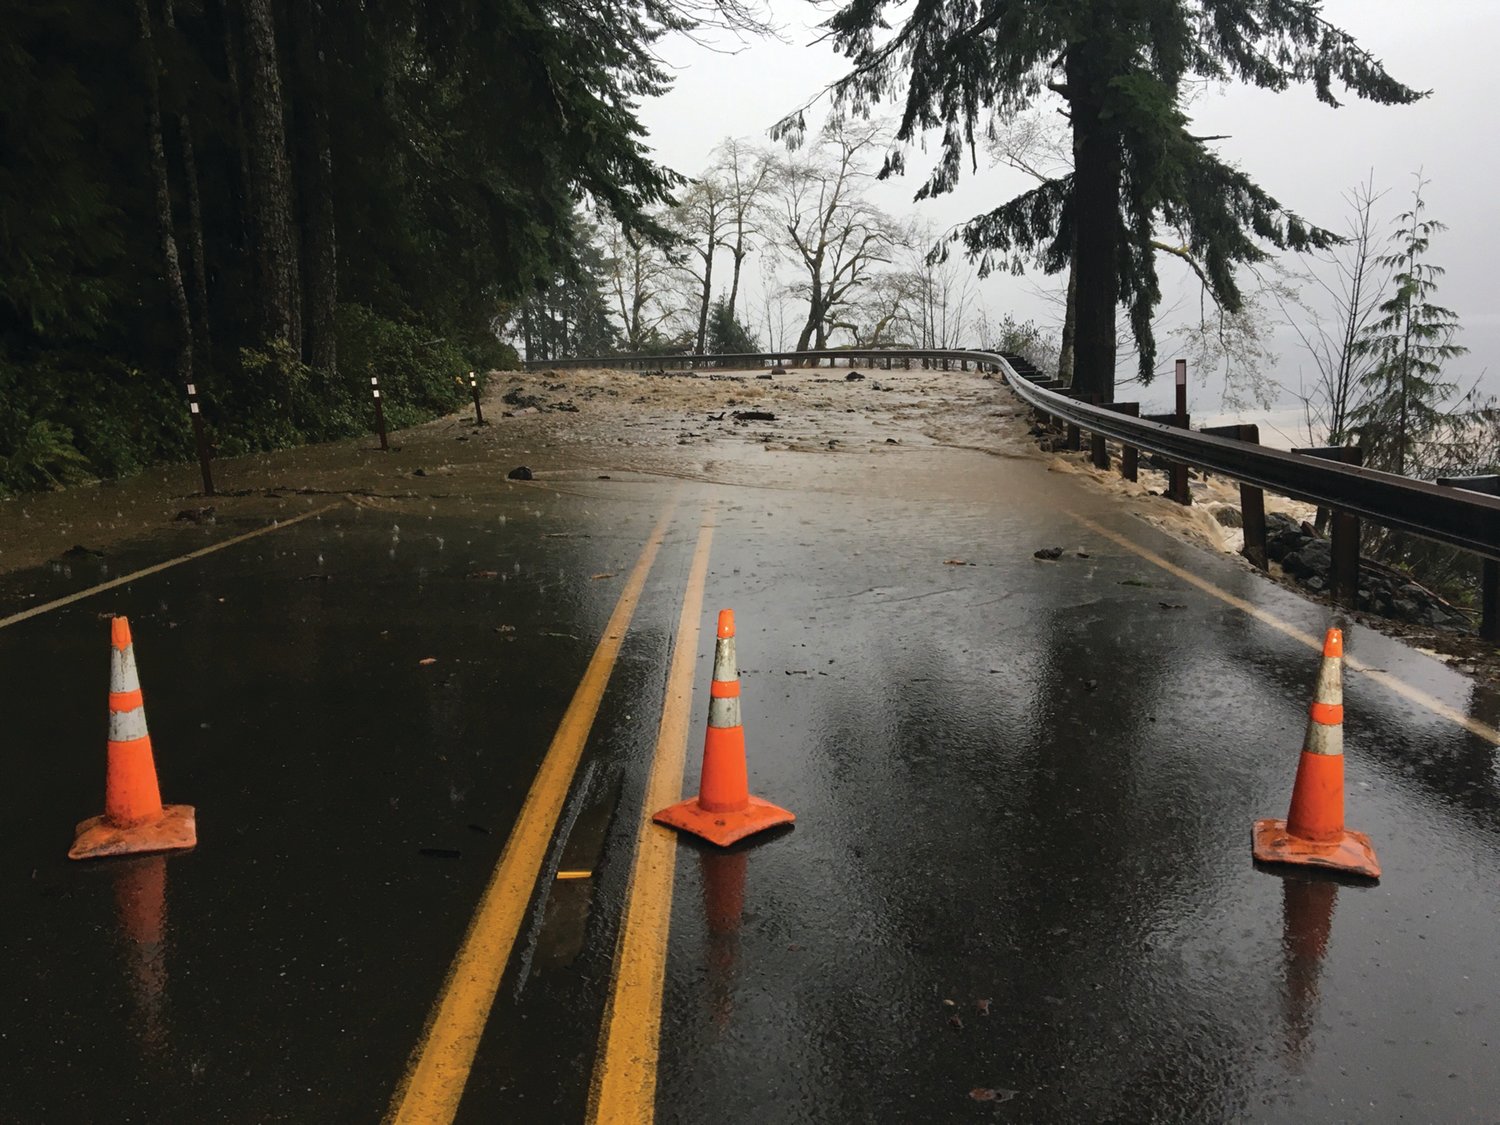 Cones are placed to block off US Highway 101 around Lake Crescent.